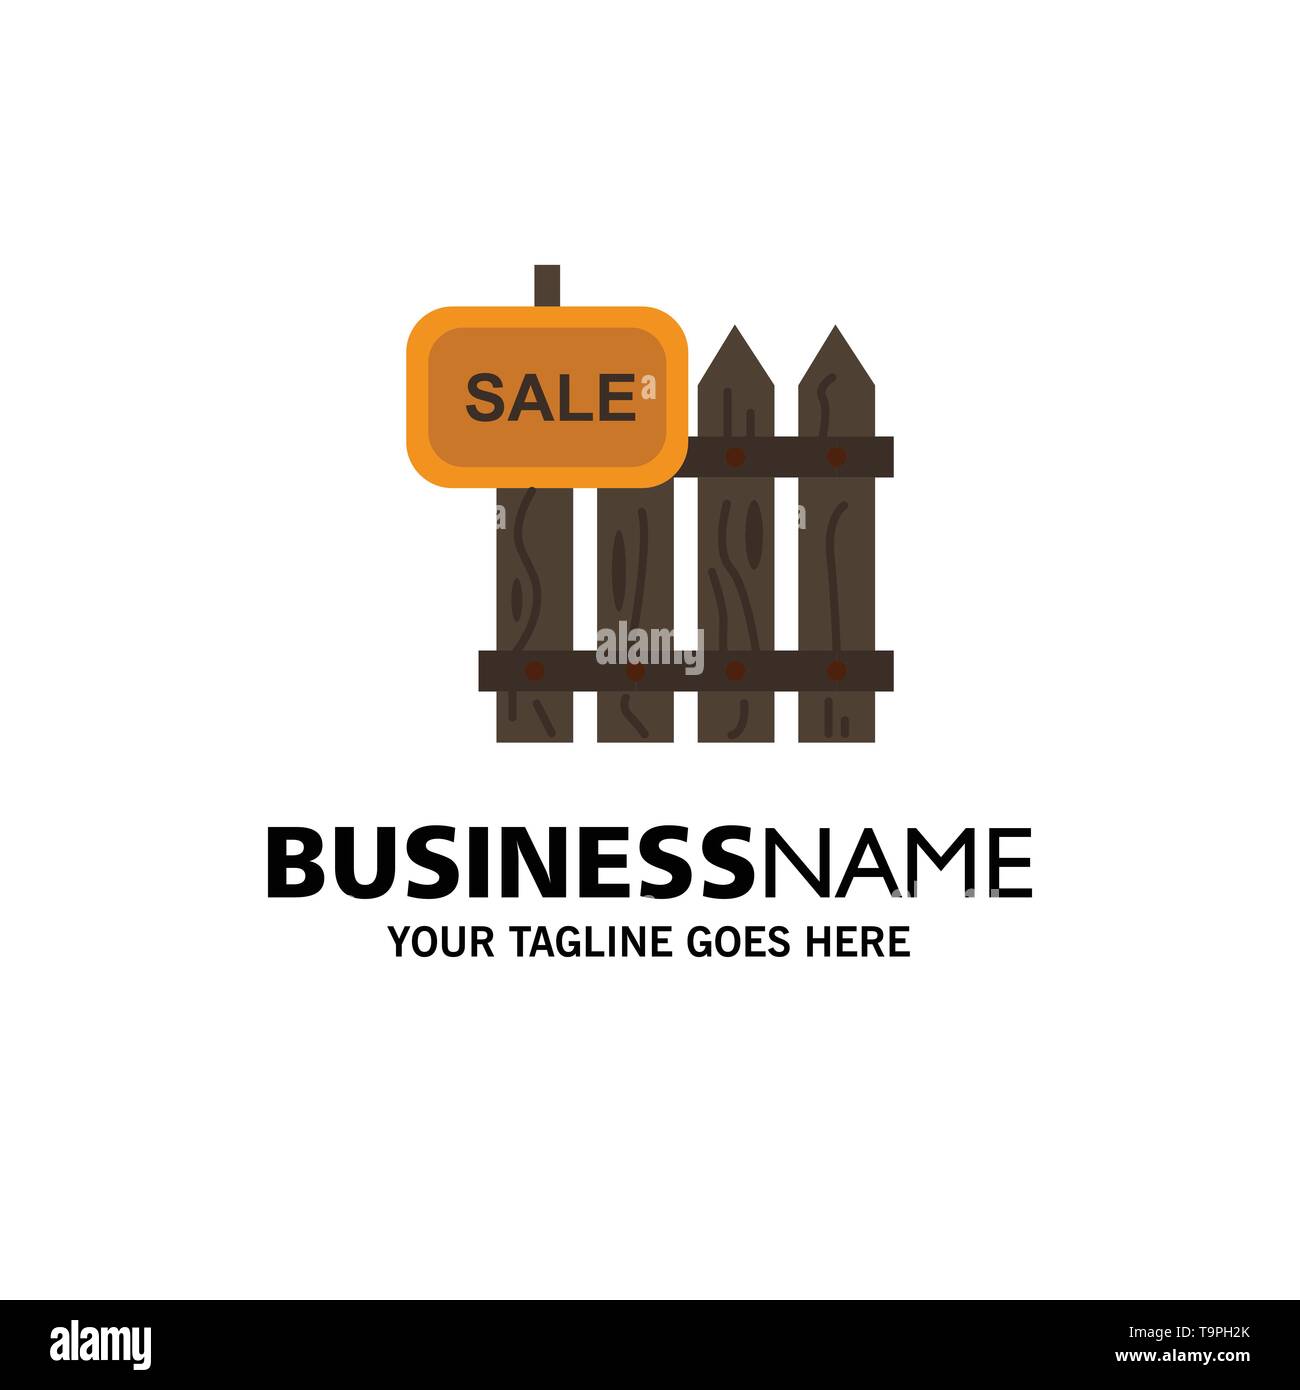 Fence, Wood, Realty, Sale, Garden, House Business Logo Template. Flat Color Stock Vector